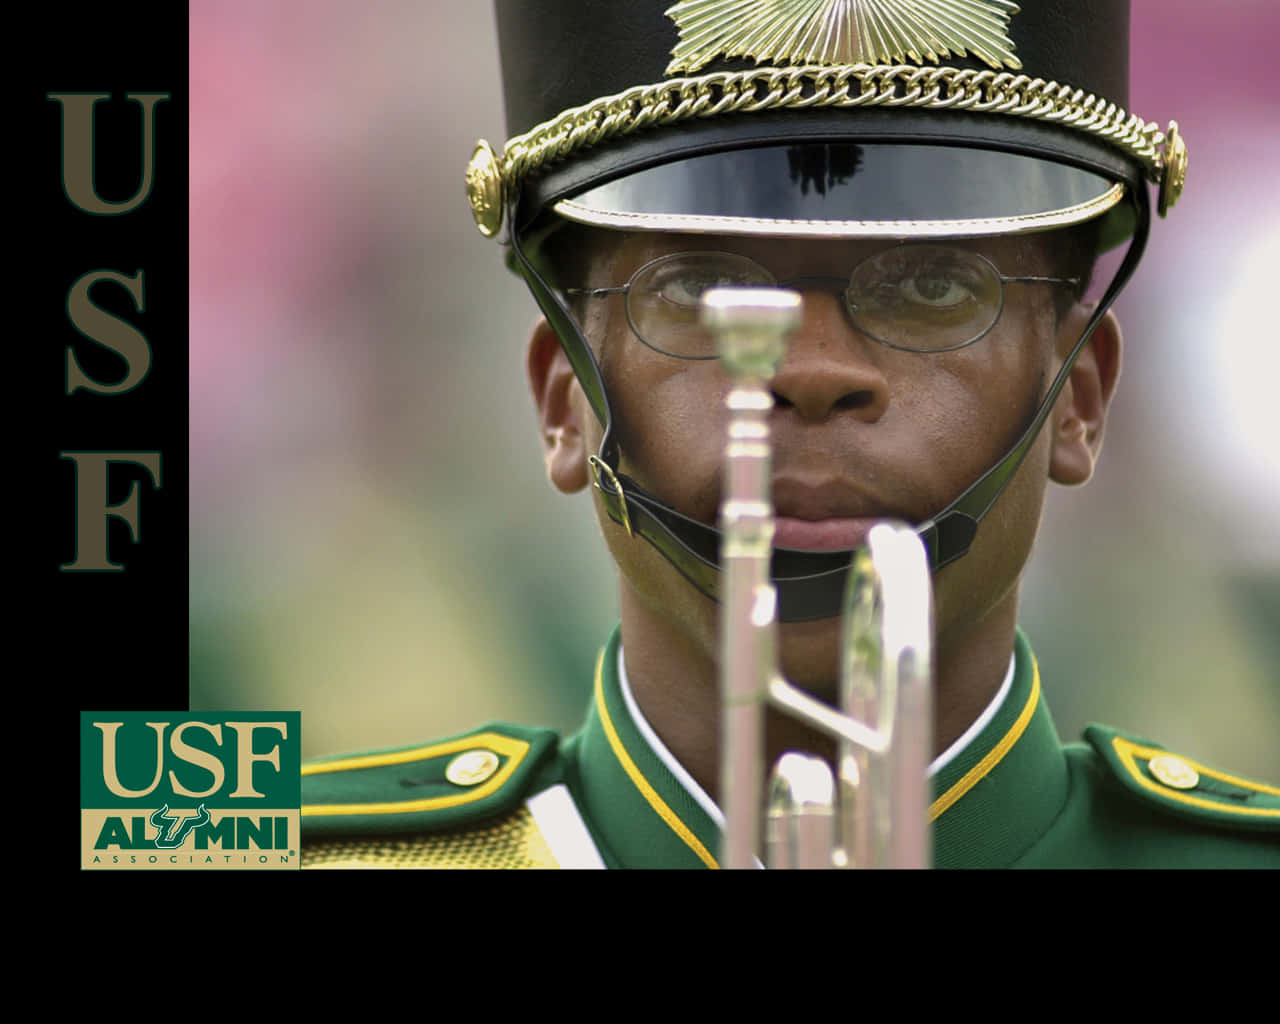 Marching Band of the University of South Florida at an Alumni Event Wallpaper